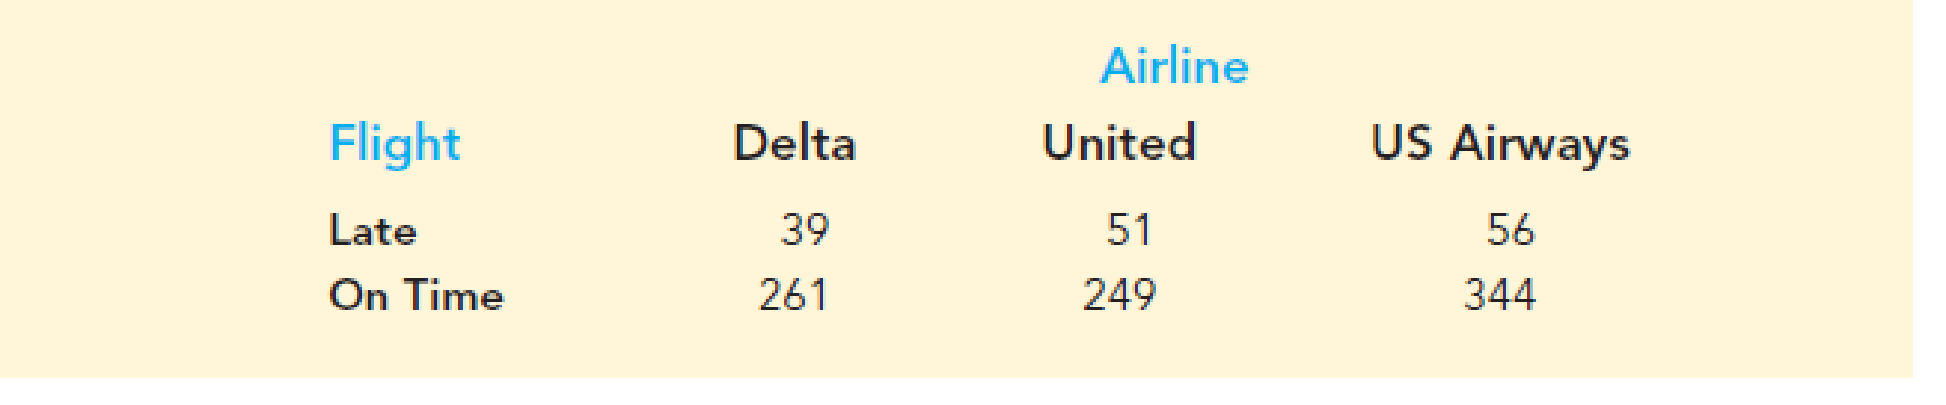 Chapter 12.1, Problem 3E, Late Flight Comparison Across Airlines. The sample data below represent the number of late and on 